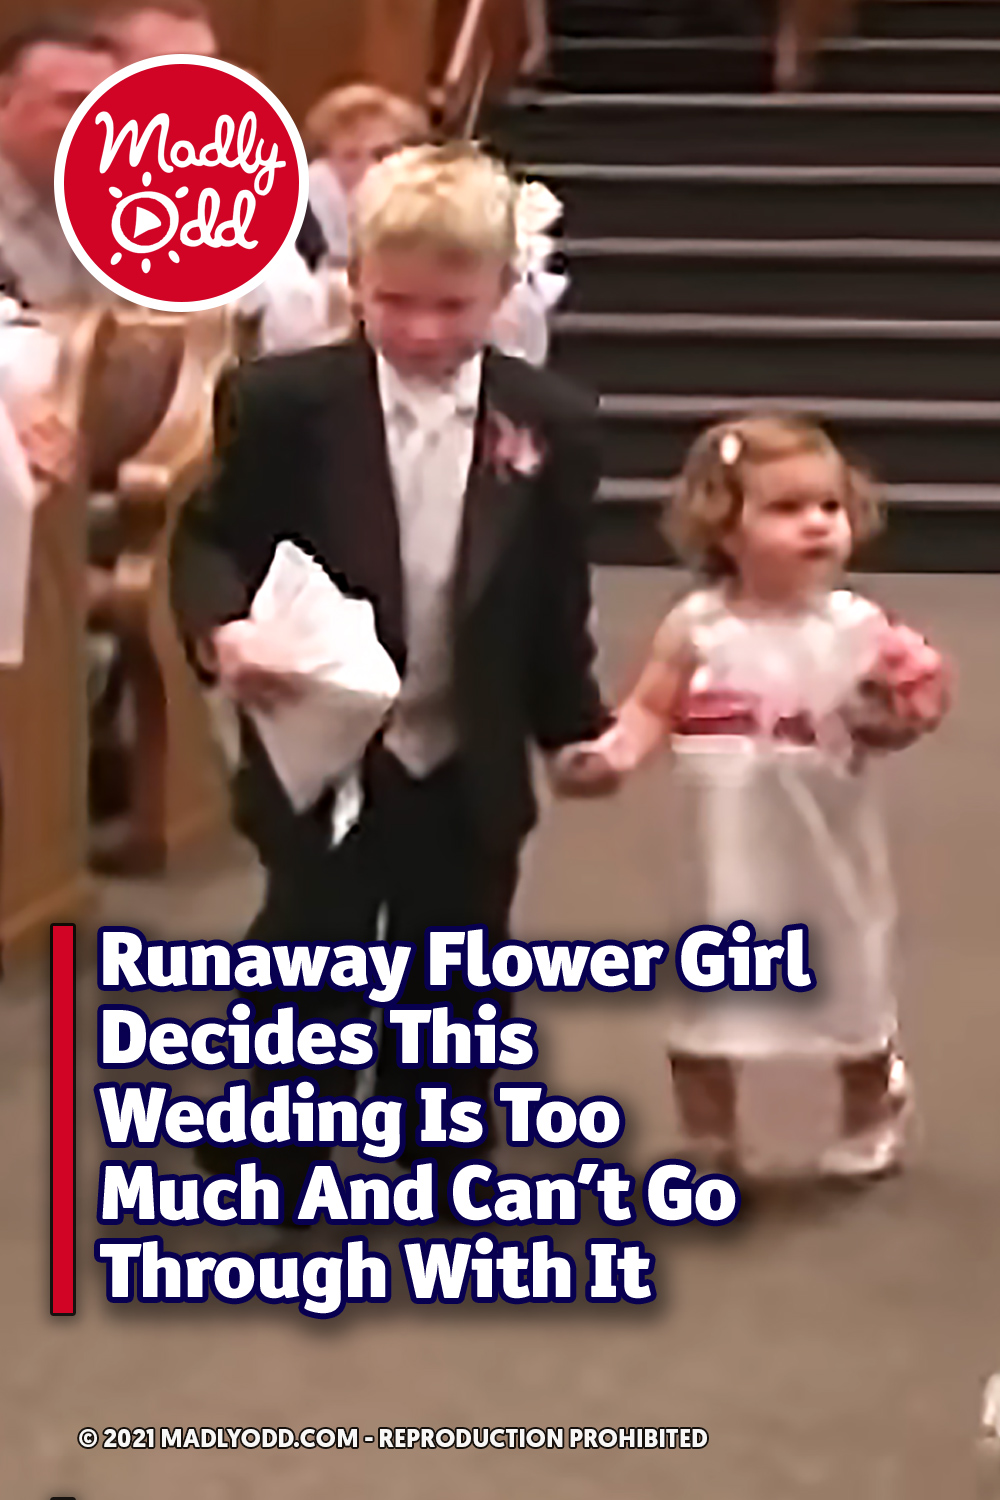 Runaway Flower Girl Decides This Wedding Is Too Much And Can’t Go Through With It